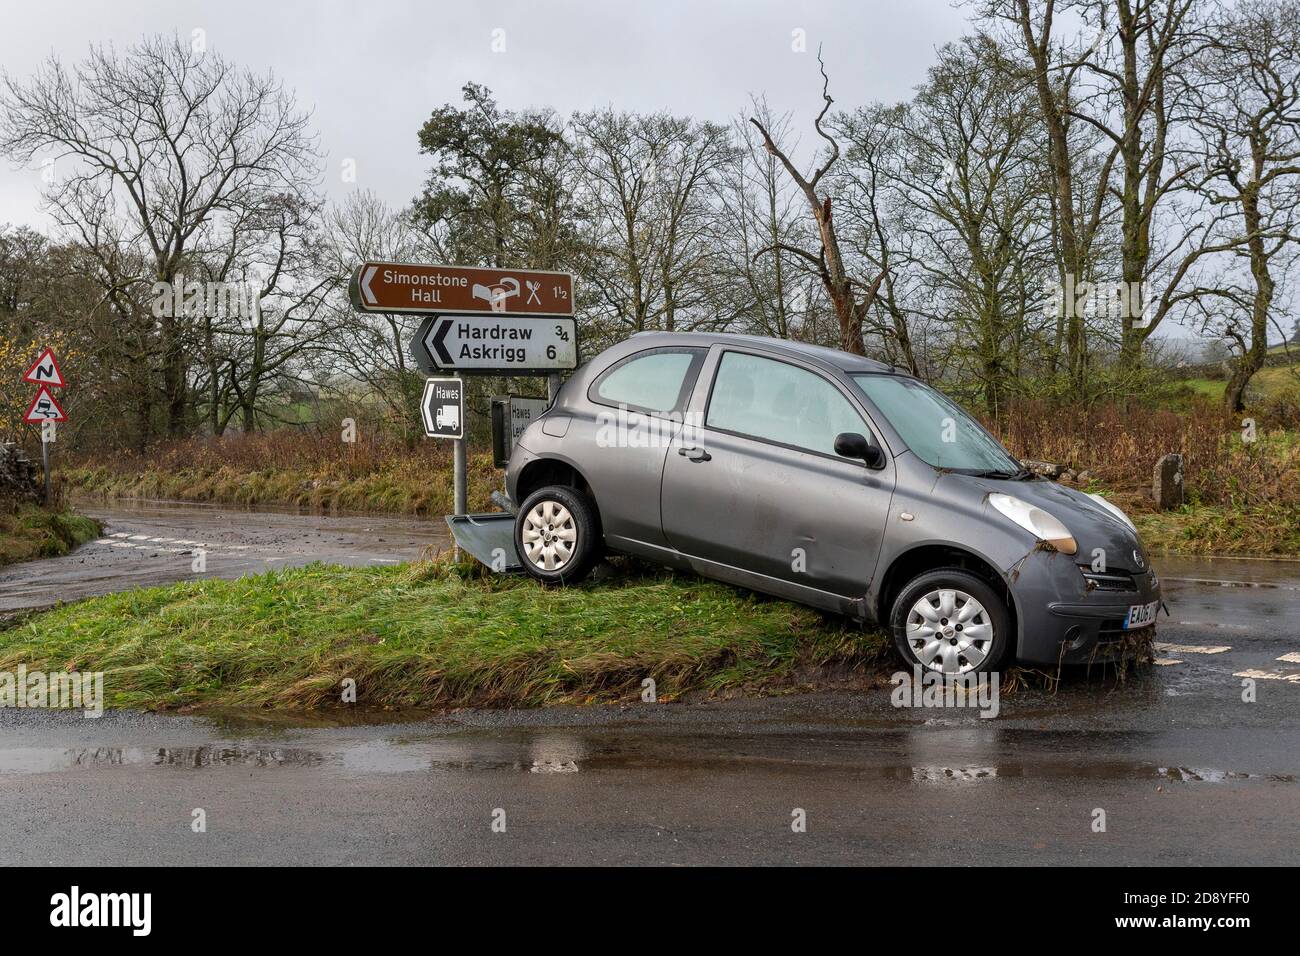 Wensleydale, North Yorkshire, UK. 2nd November, 2020. Storm Aiden swept through Wensleydale overnight causing damage and flooding. At one time the market town of Hawes was cut off due to rising flood water after the River Ure burst its banks. Credit: Wayne HUTCHINSON/Alamy Live News Stock Photo